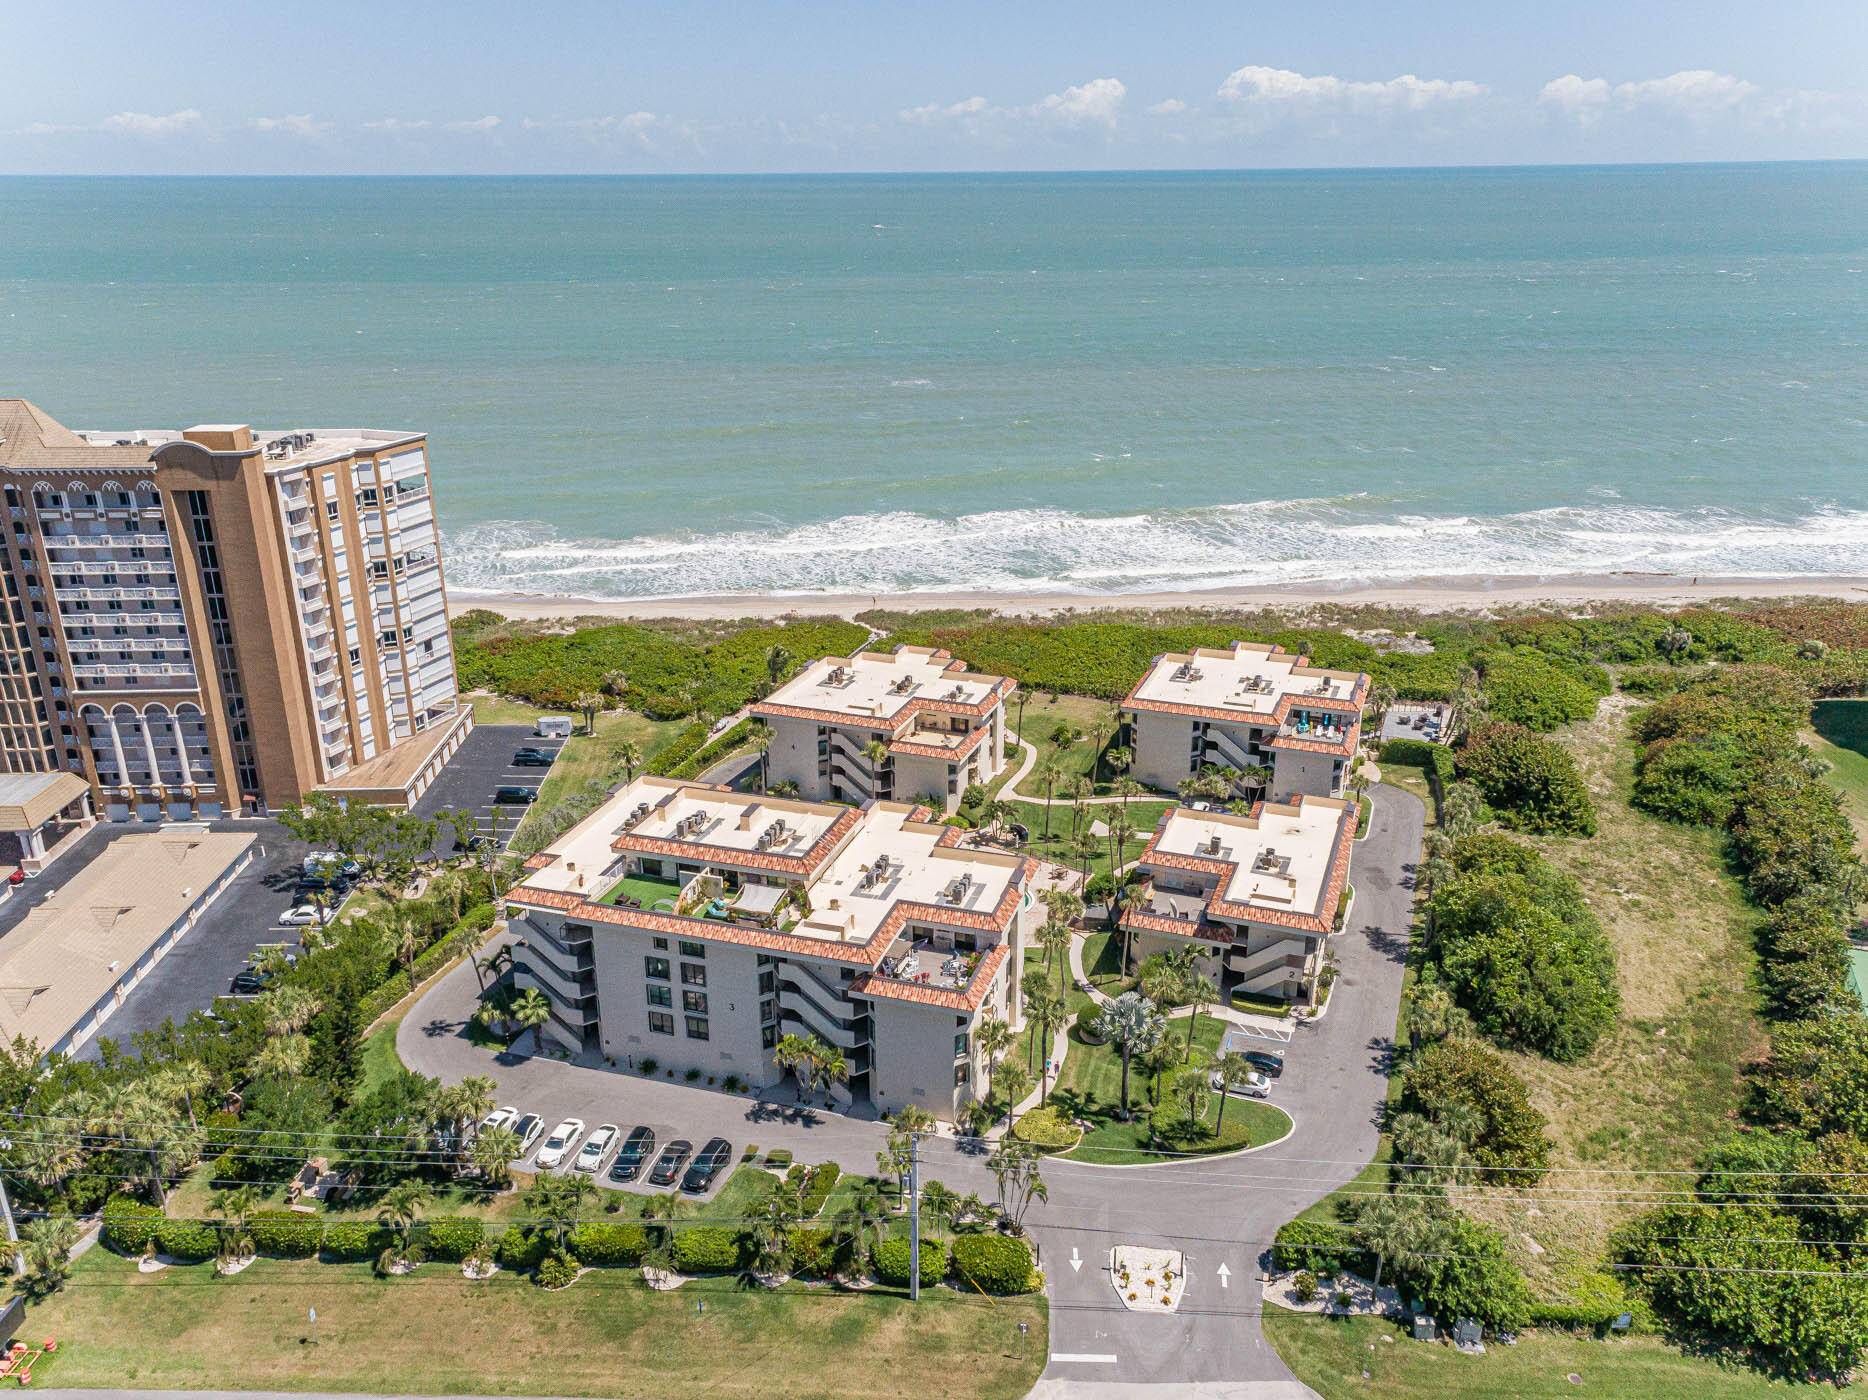 Beachfront 3bed 3bath condo filled with luxury and natural beauty.